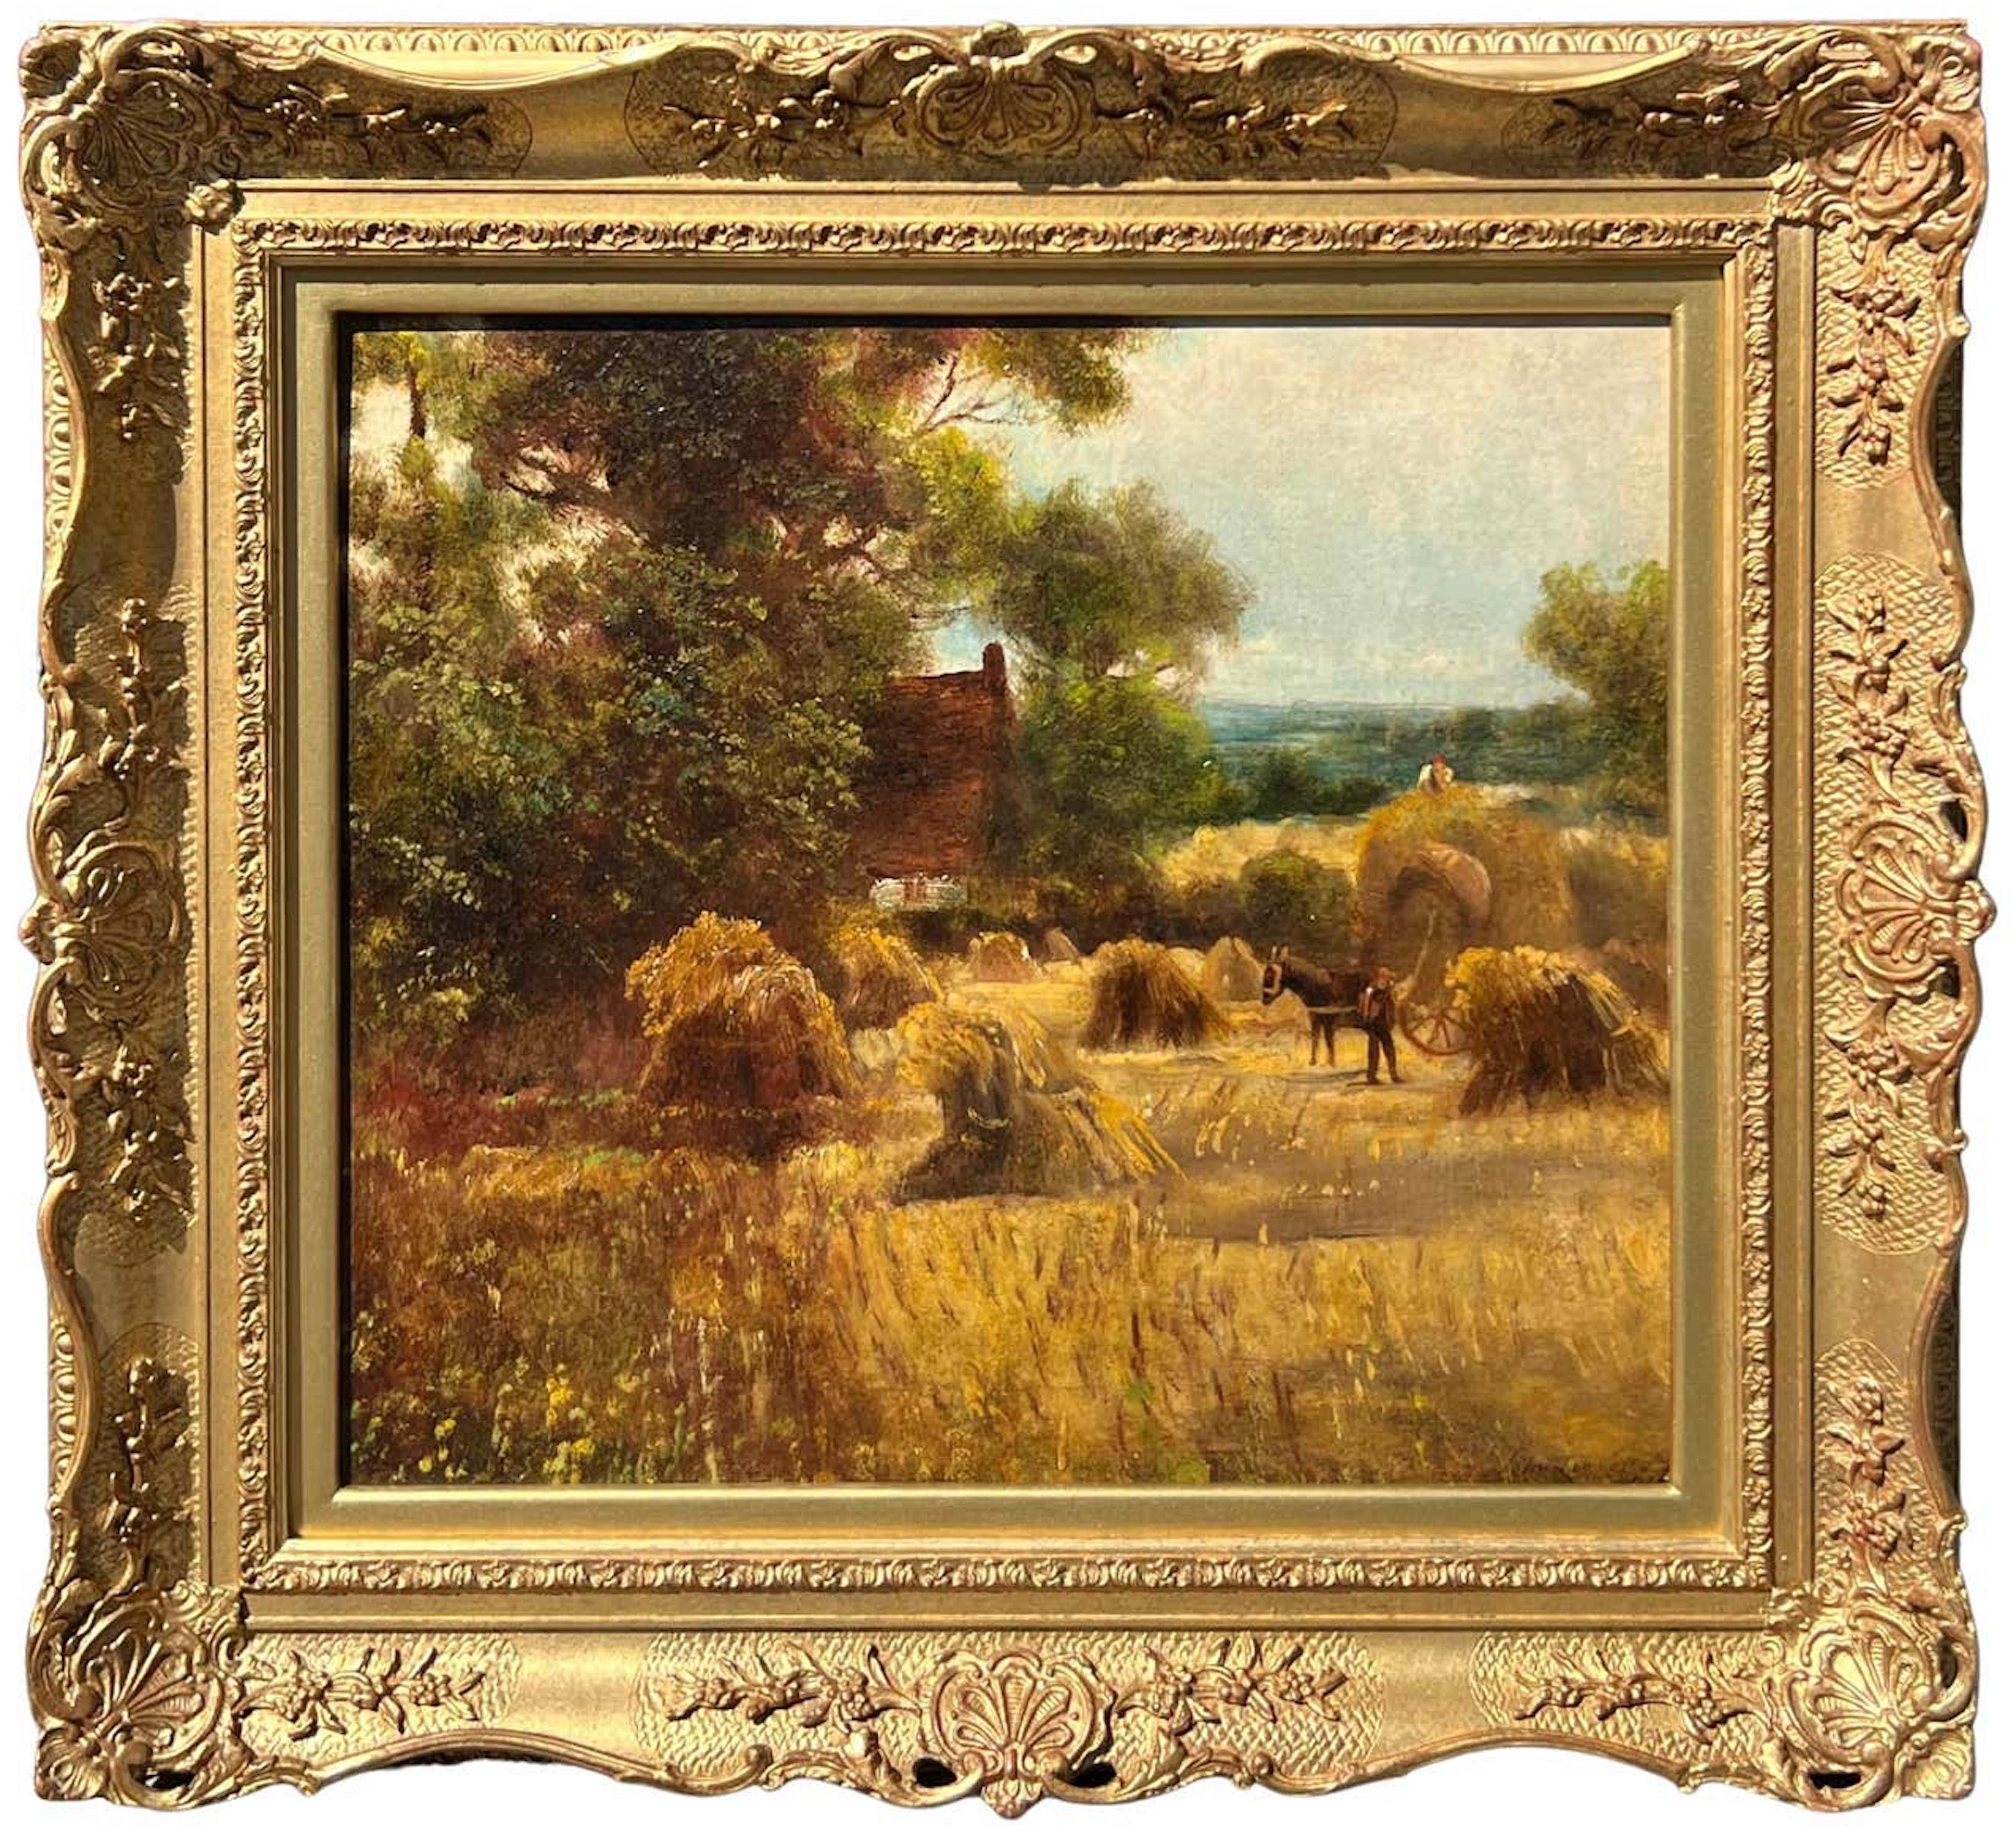 John Linnell (b.1792) Landscape Painting - Baling the Hay